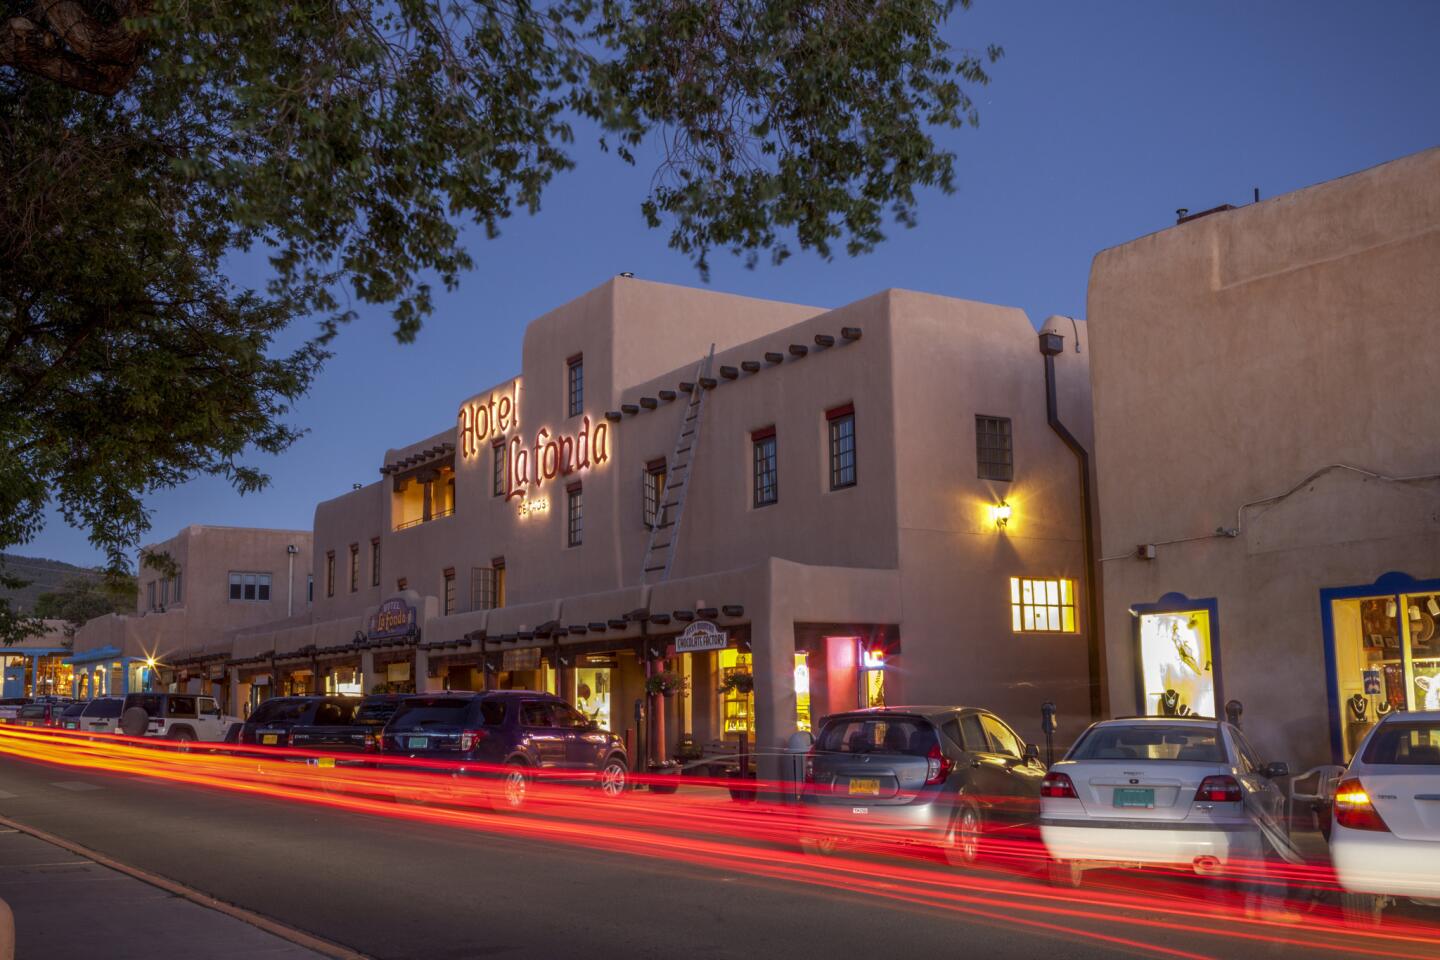 Taos Plaza and the historic Hotel La Fonda are part of a bustling downtown scene.